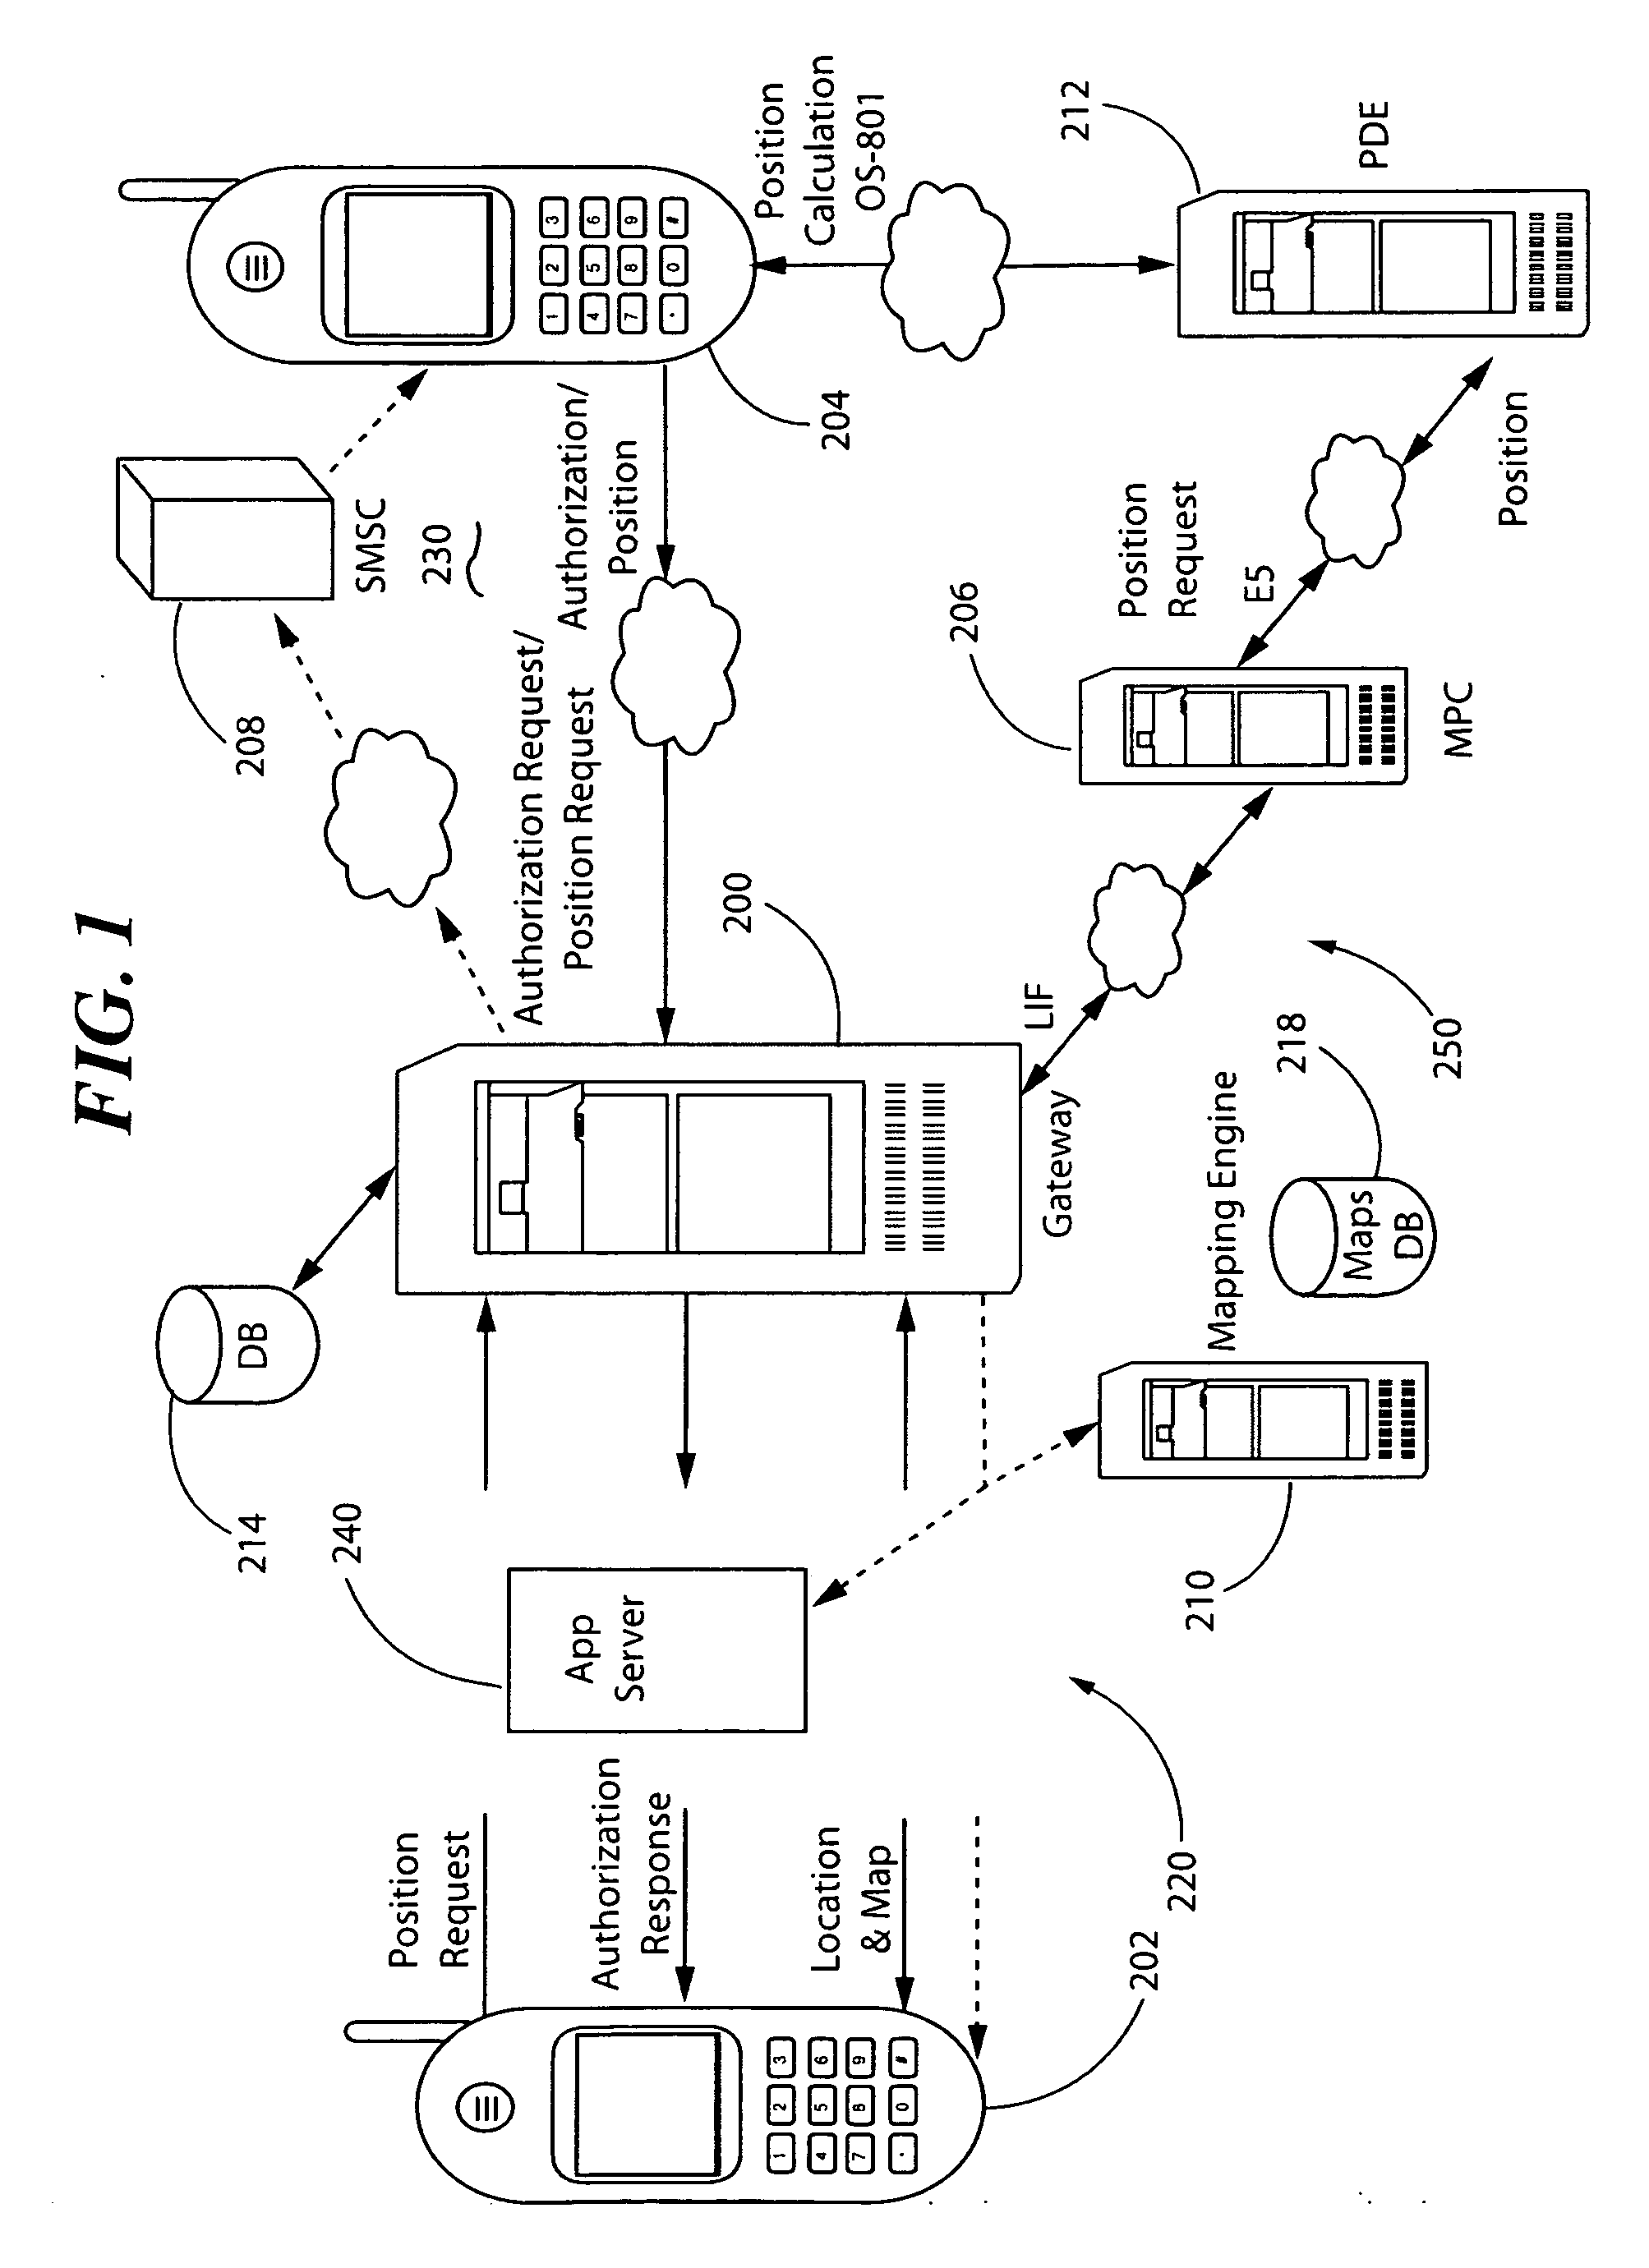 Method and system for utilizing a location-based internetwork gateway